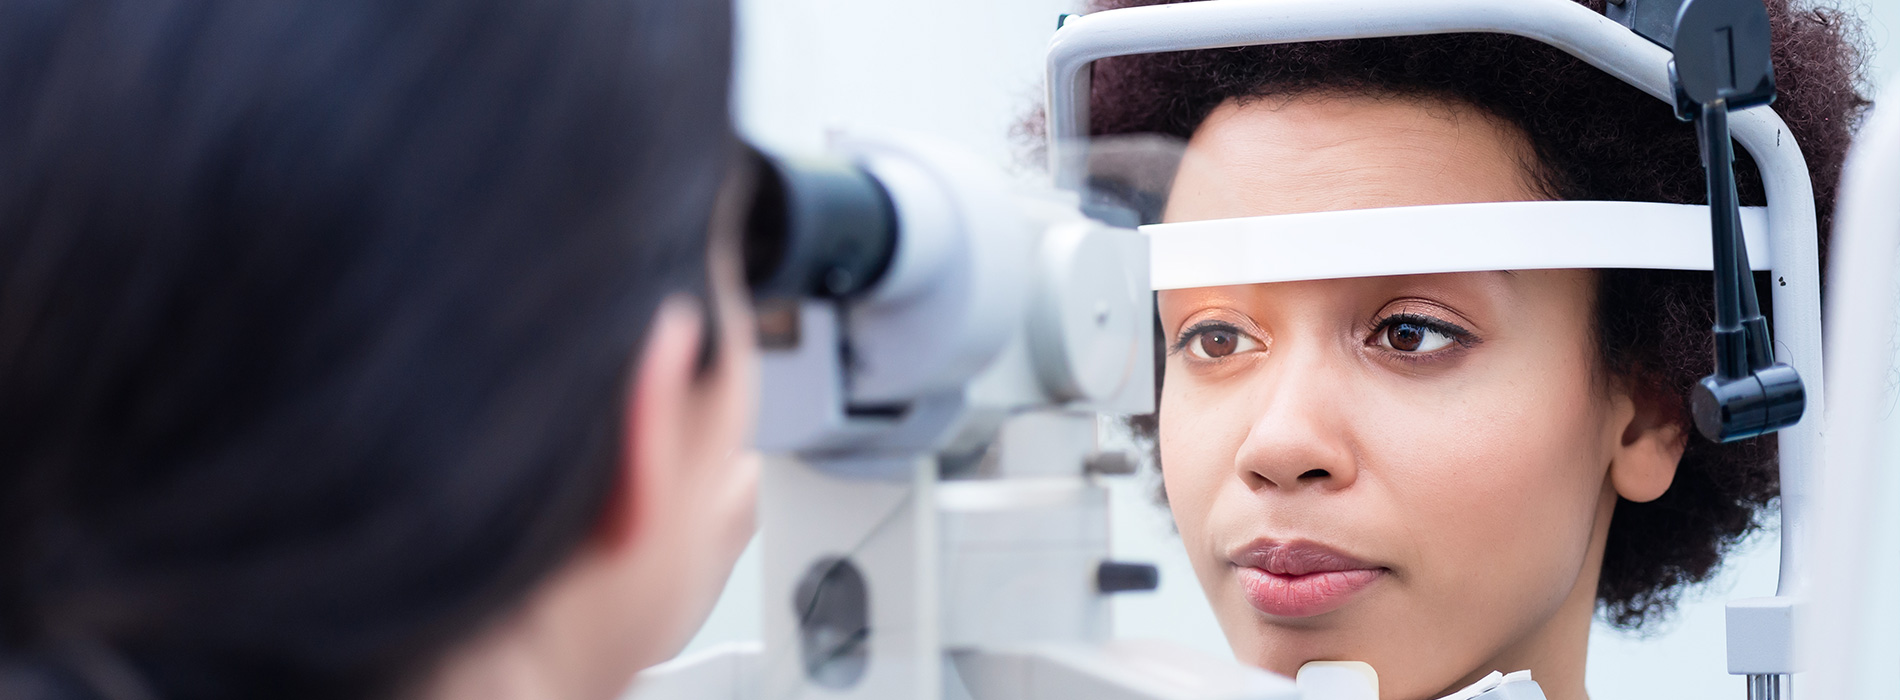 Clear Eye Care | Cataract Diagnosis   Management, Vision Therapy and Macular Degeneration Evaluation   Treatment